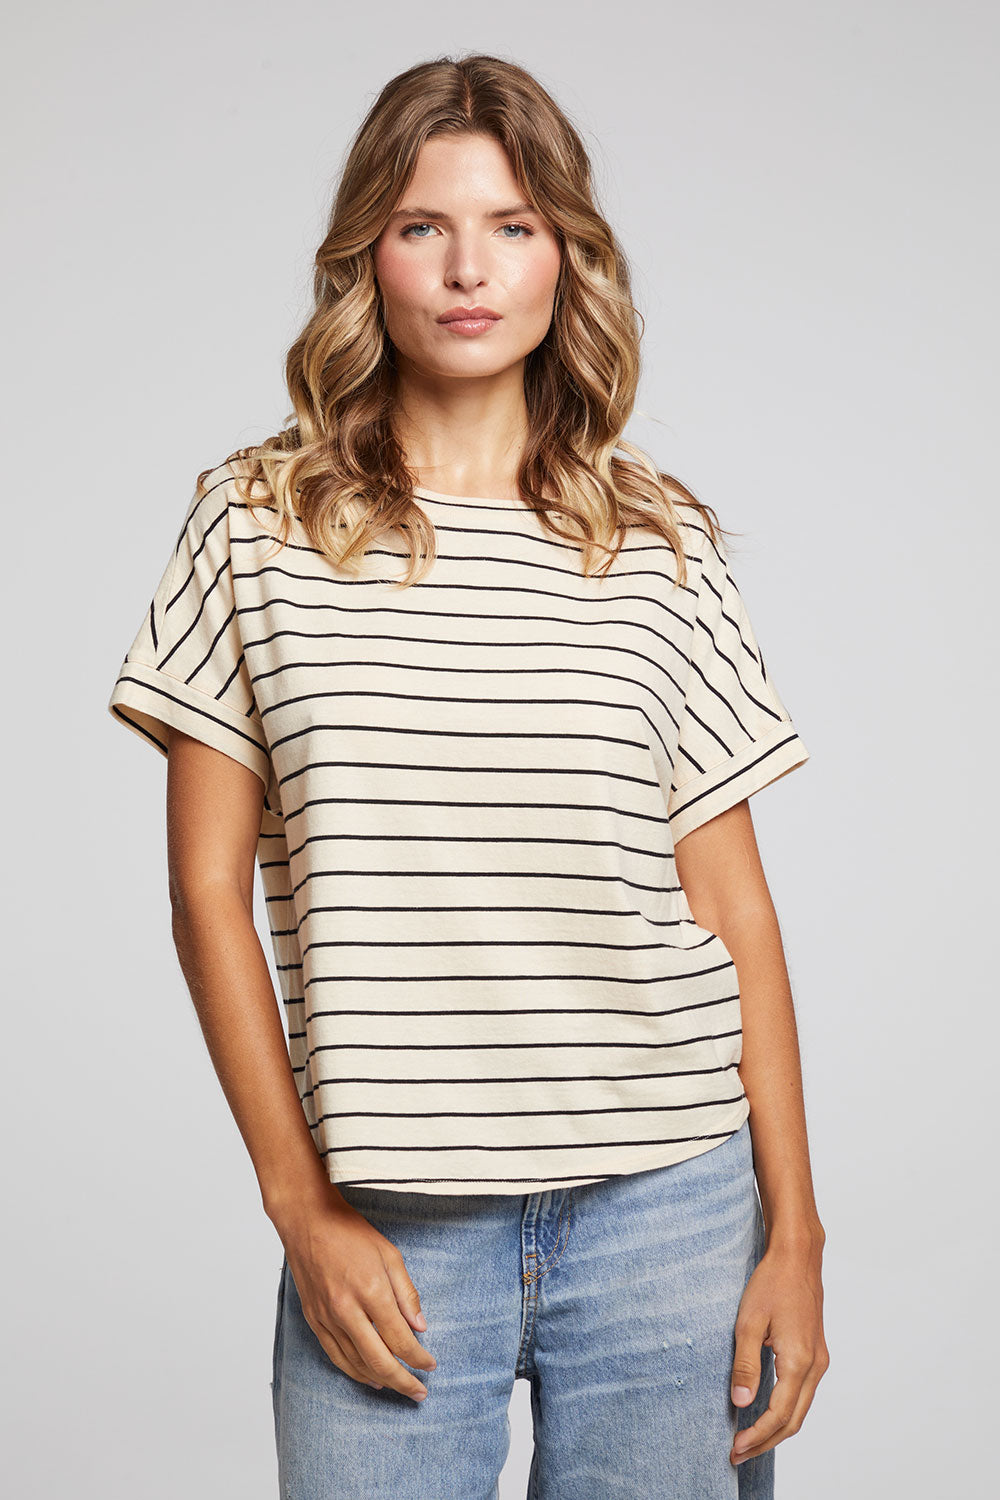 Chaser Amber Striped Tee